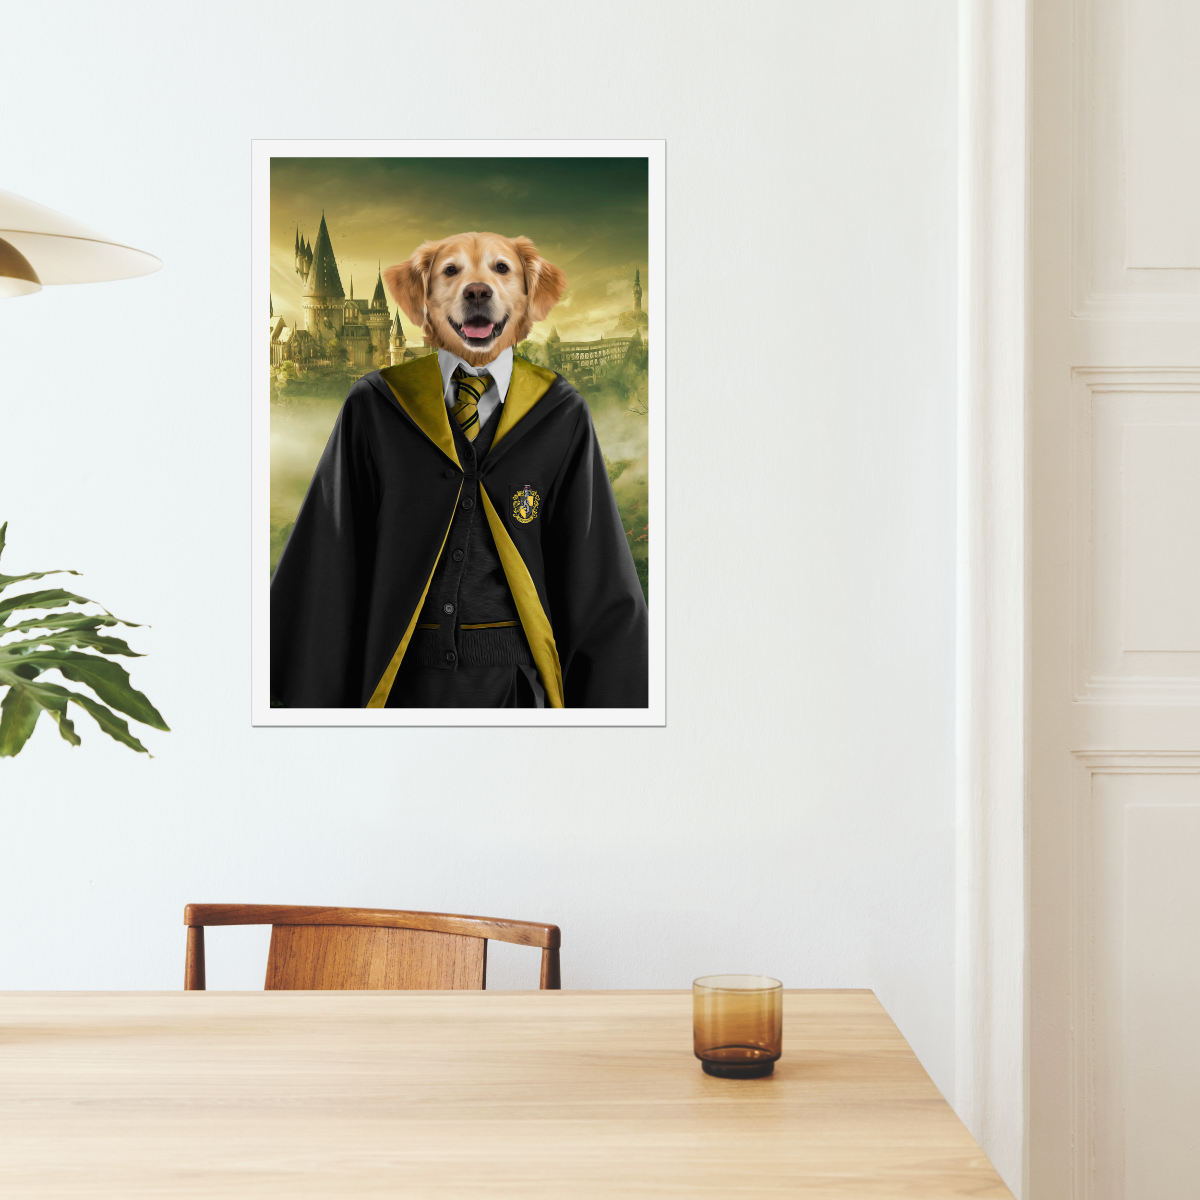 Paw & Glory, paw and glory, paintings of pets from photos, dog portrait painting, my pet painting, pet portrait singapore, pet portrait admiral, nasa dog portrait, pet portrait